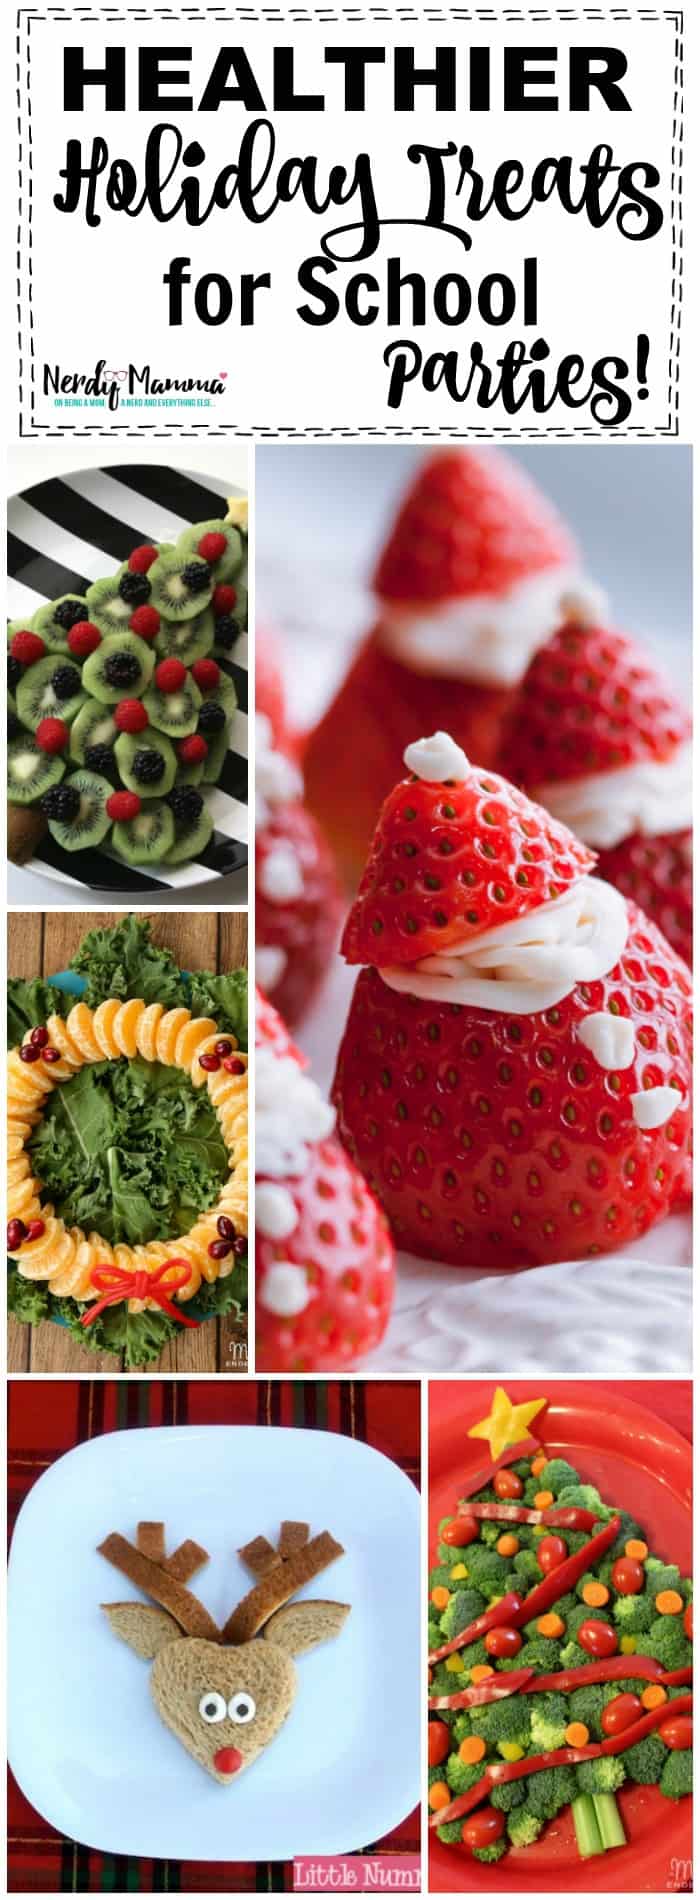 These healthy holiday treats are perfect for school parties!